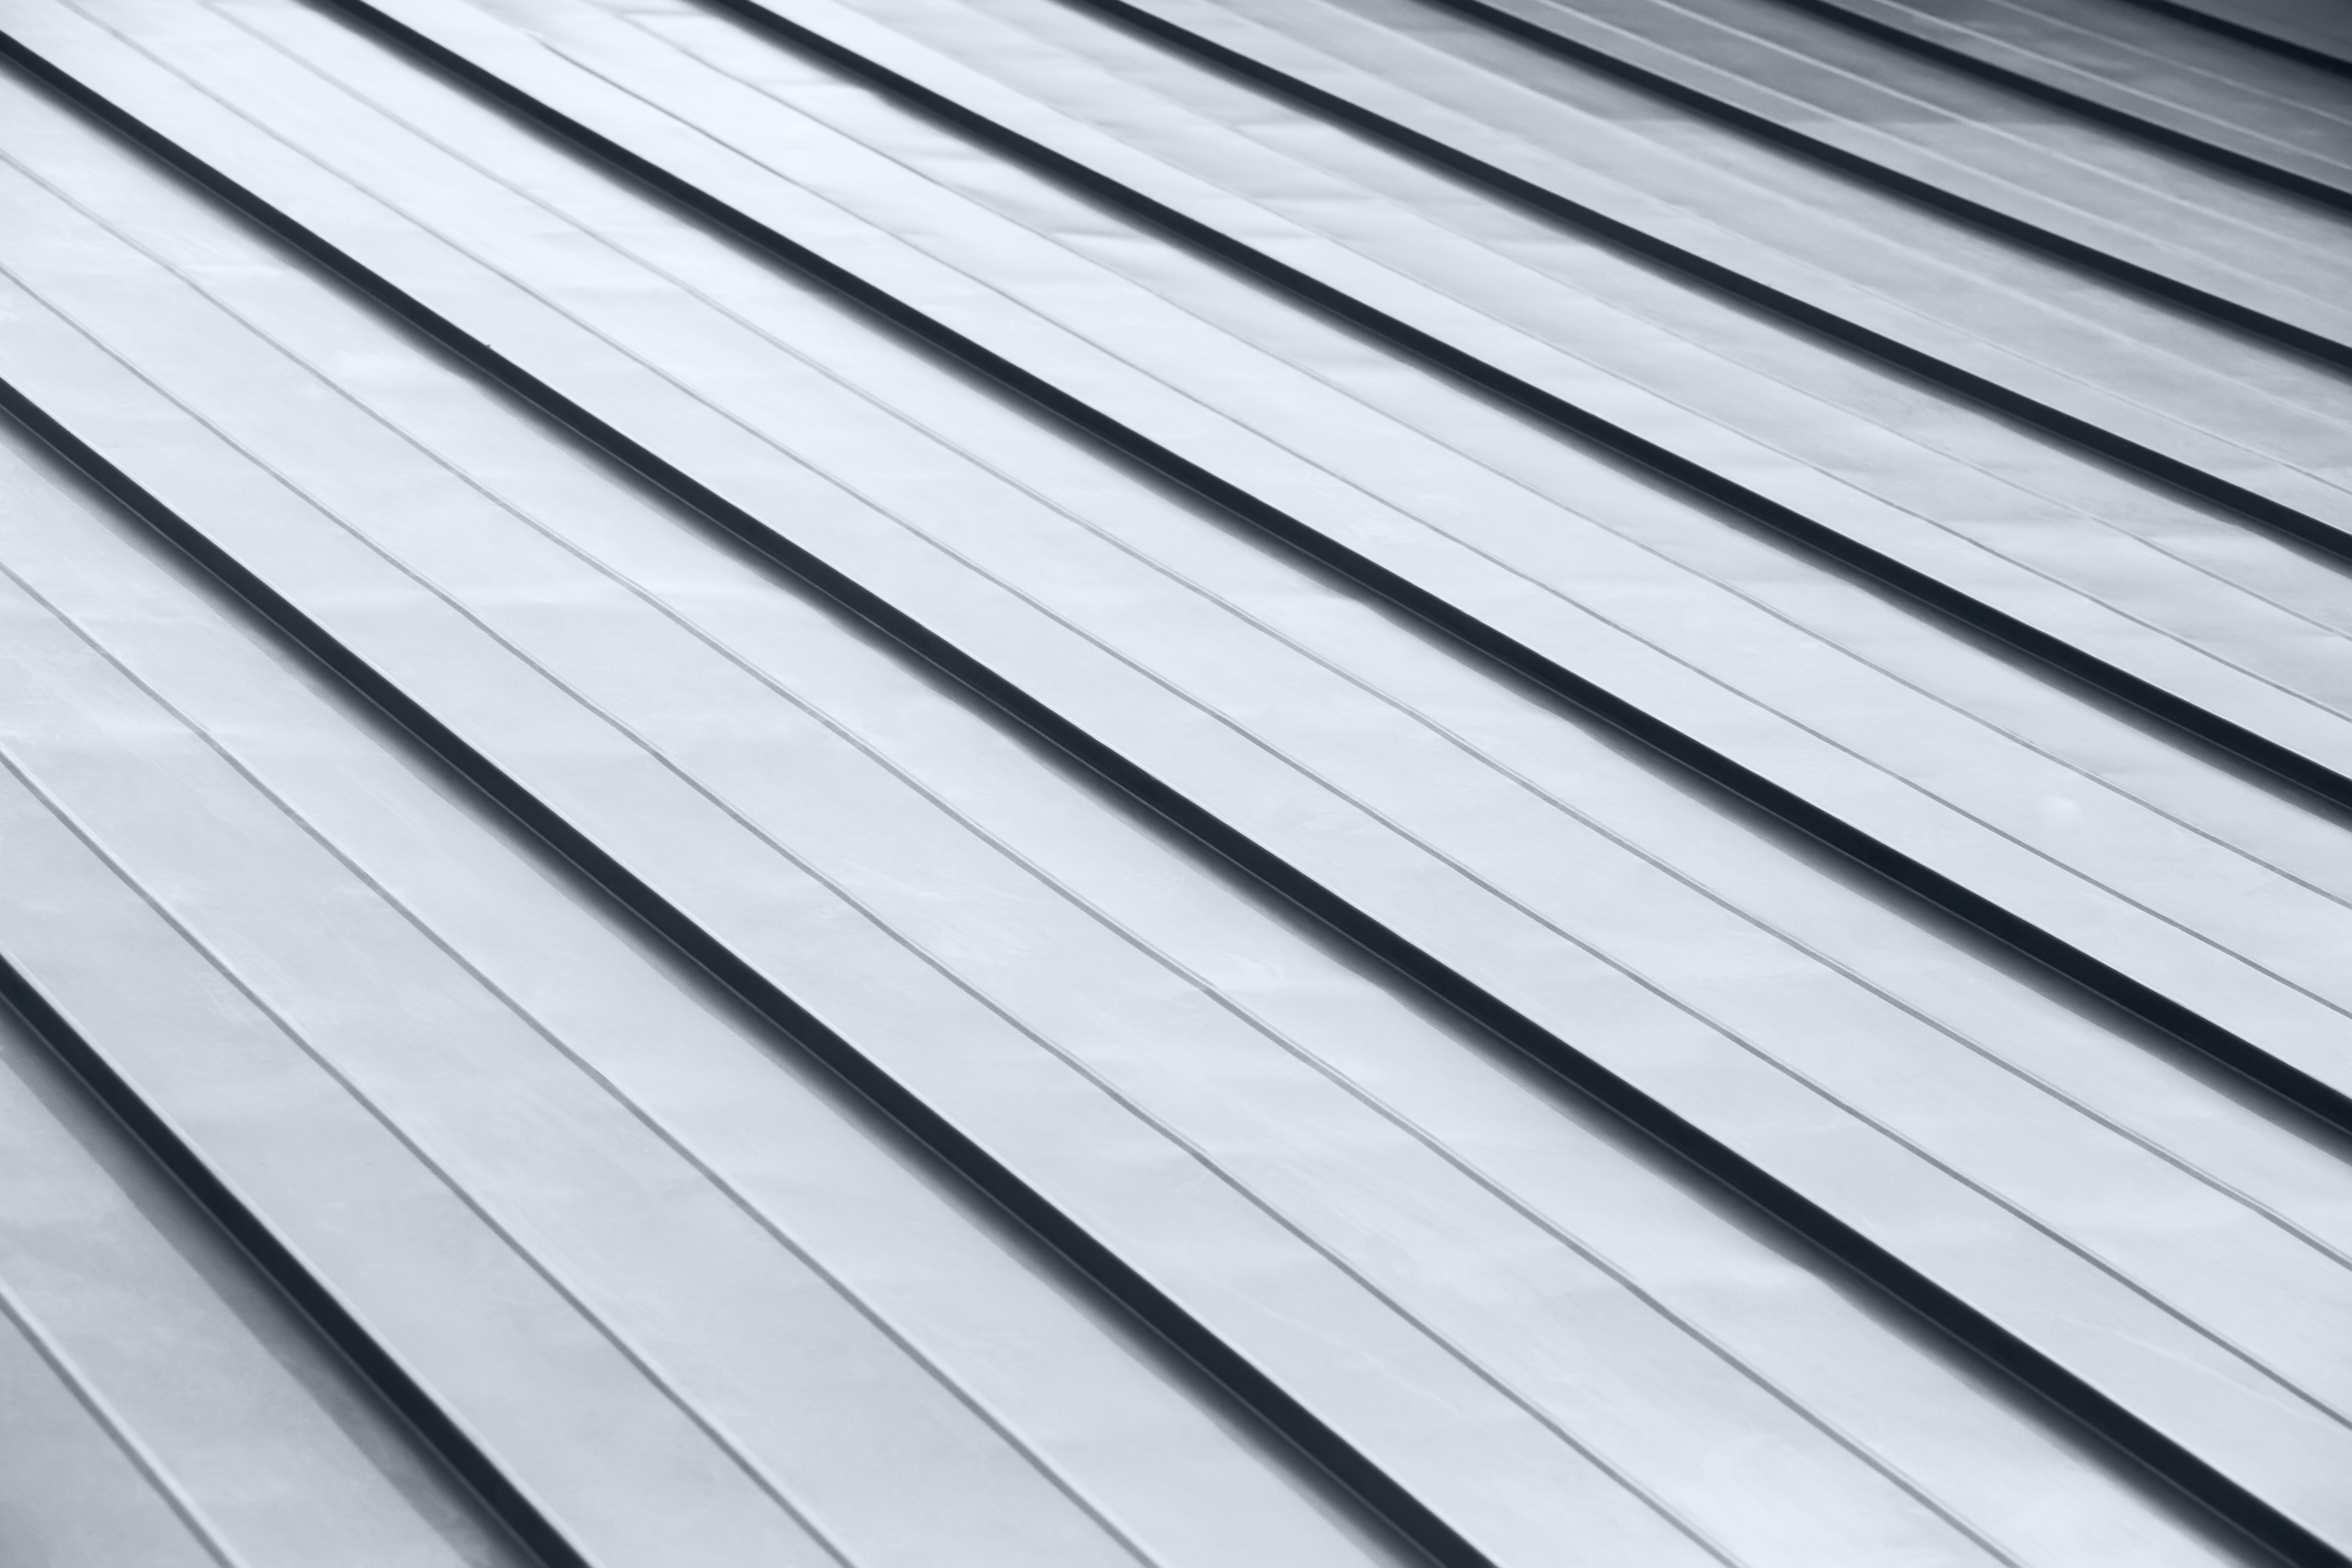 New corrugated metallic gray roof surface background